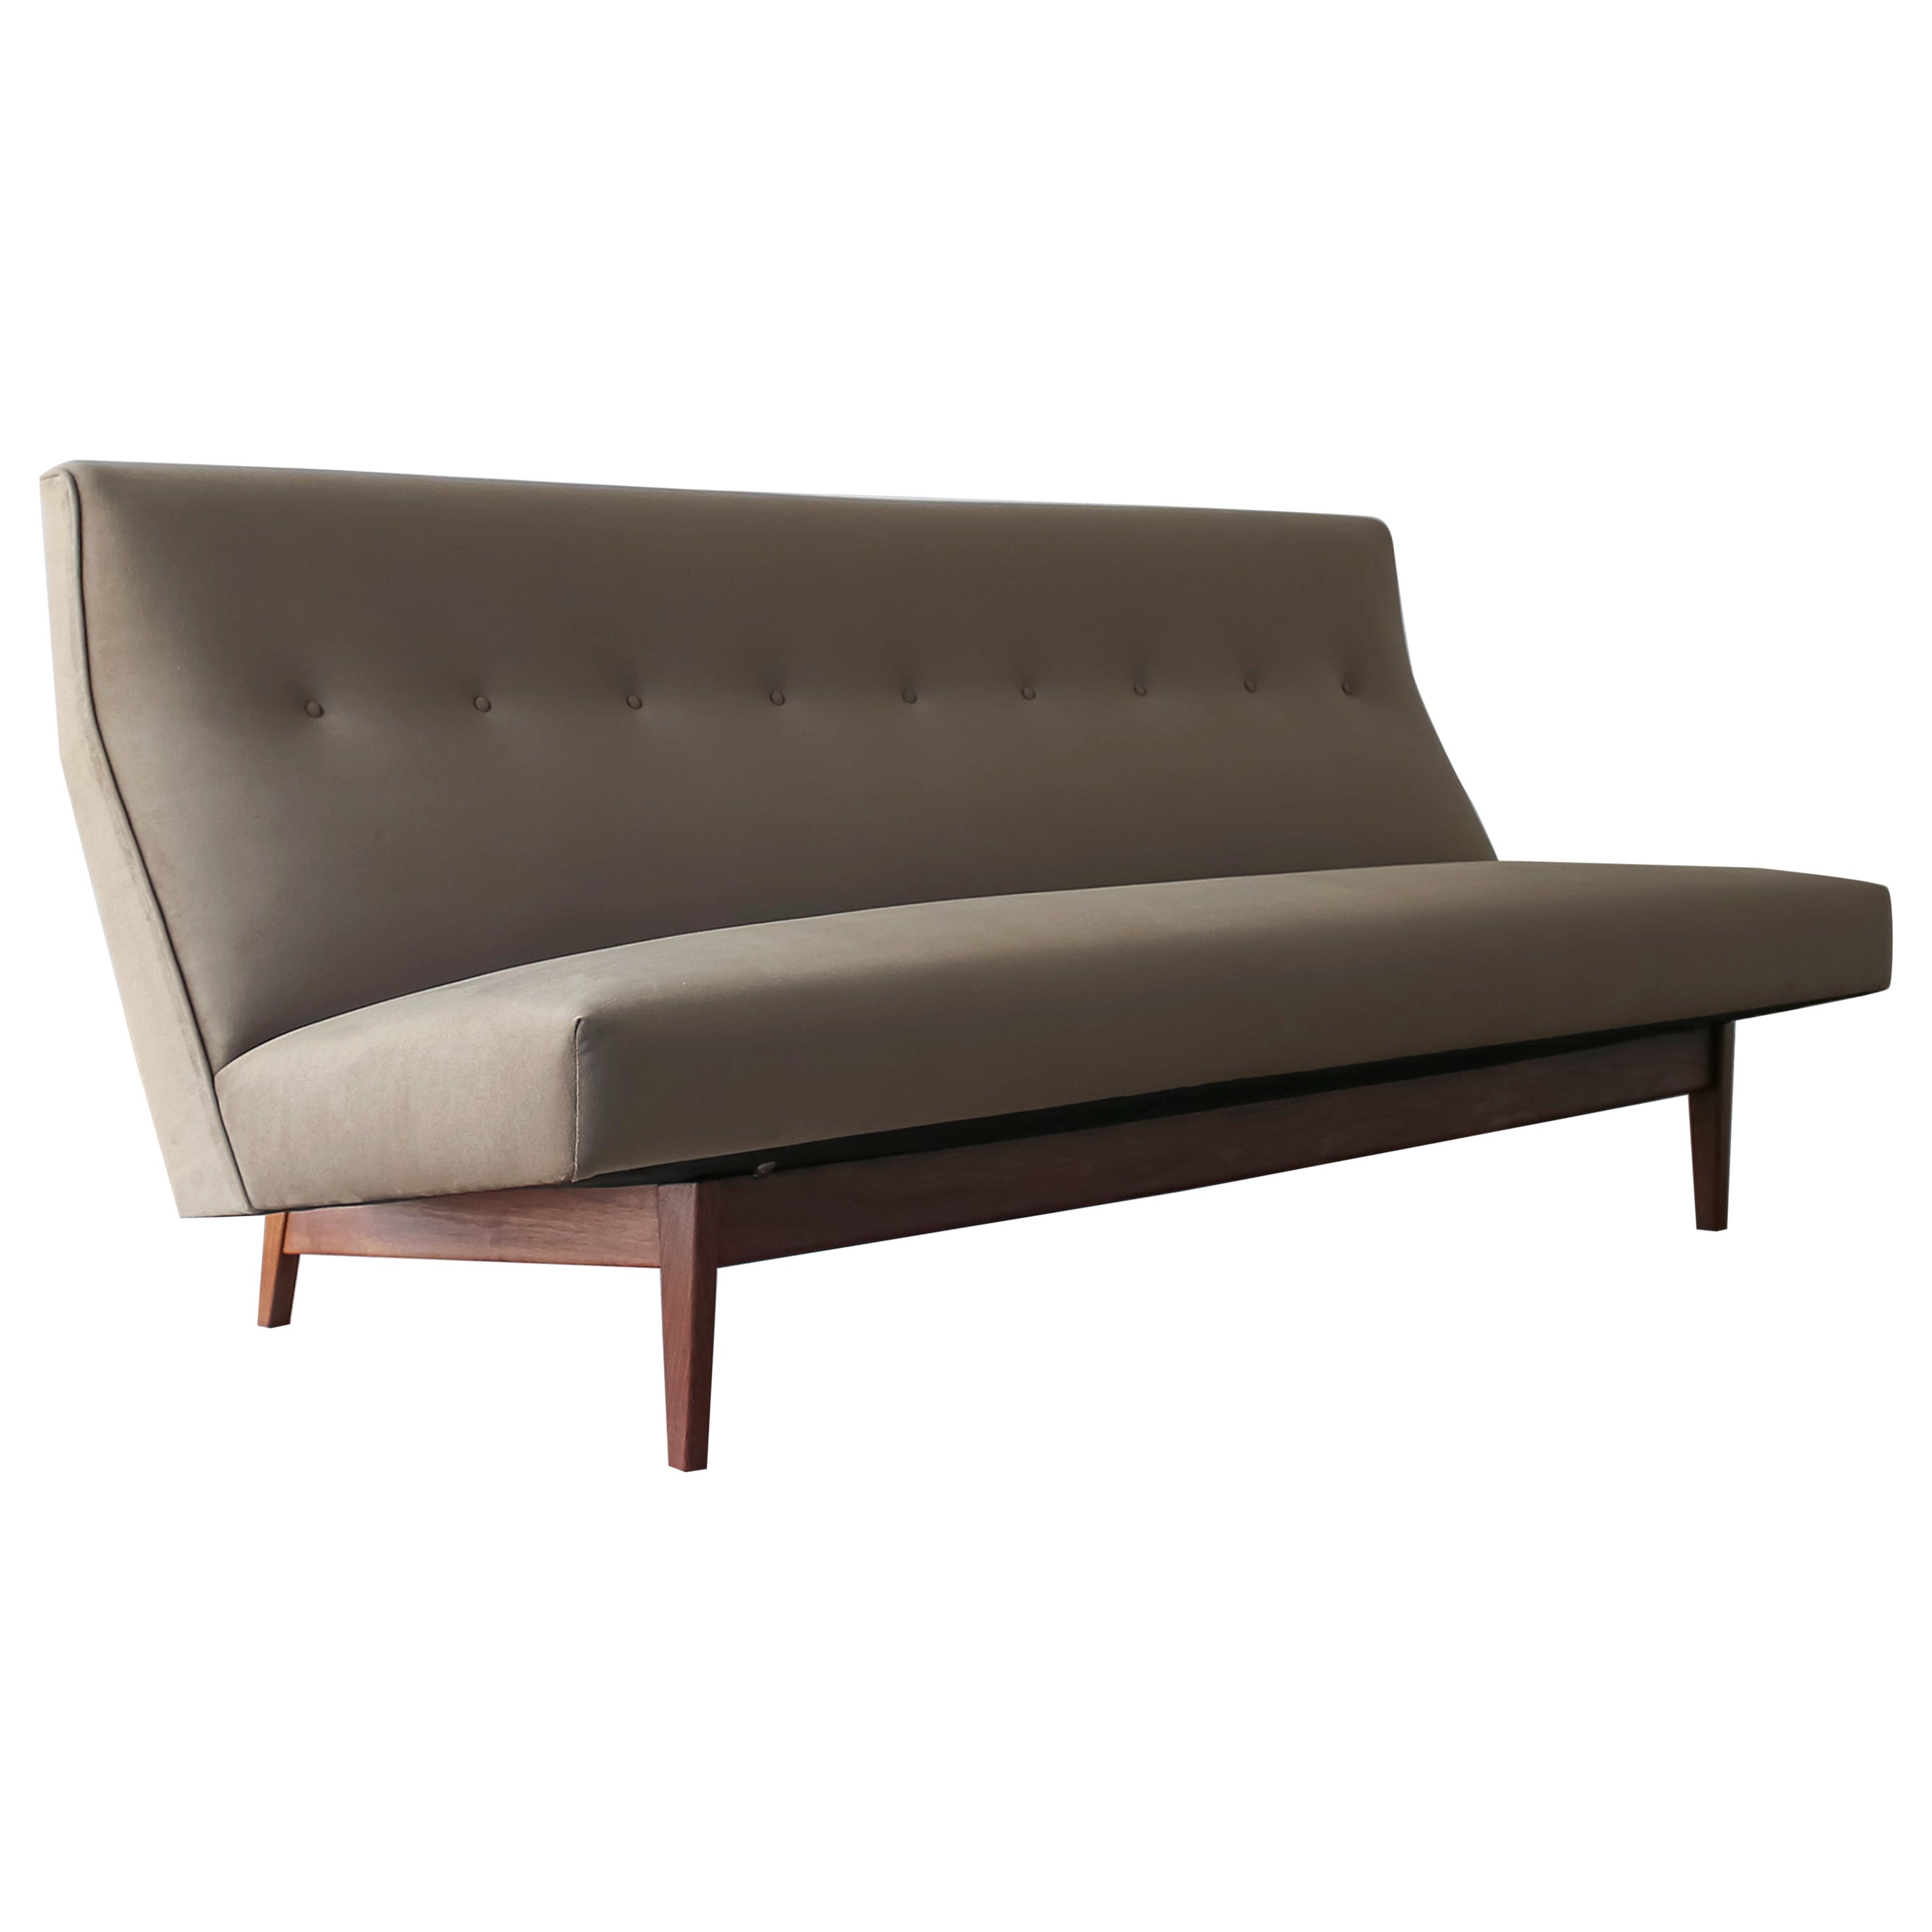 Model 250 Armless Sofa by Jens Risom - 2 Available For Sale